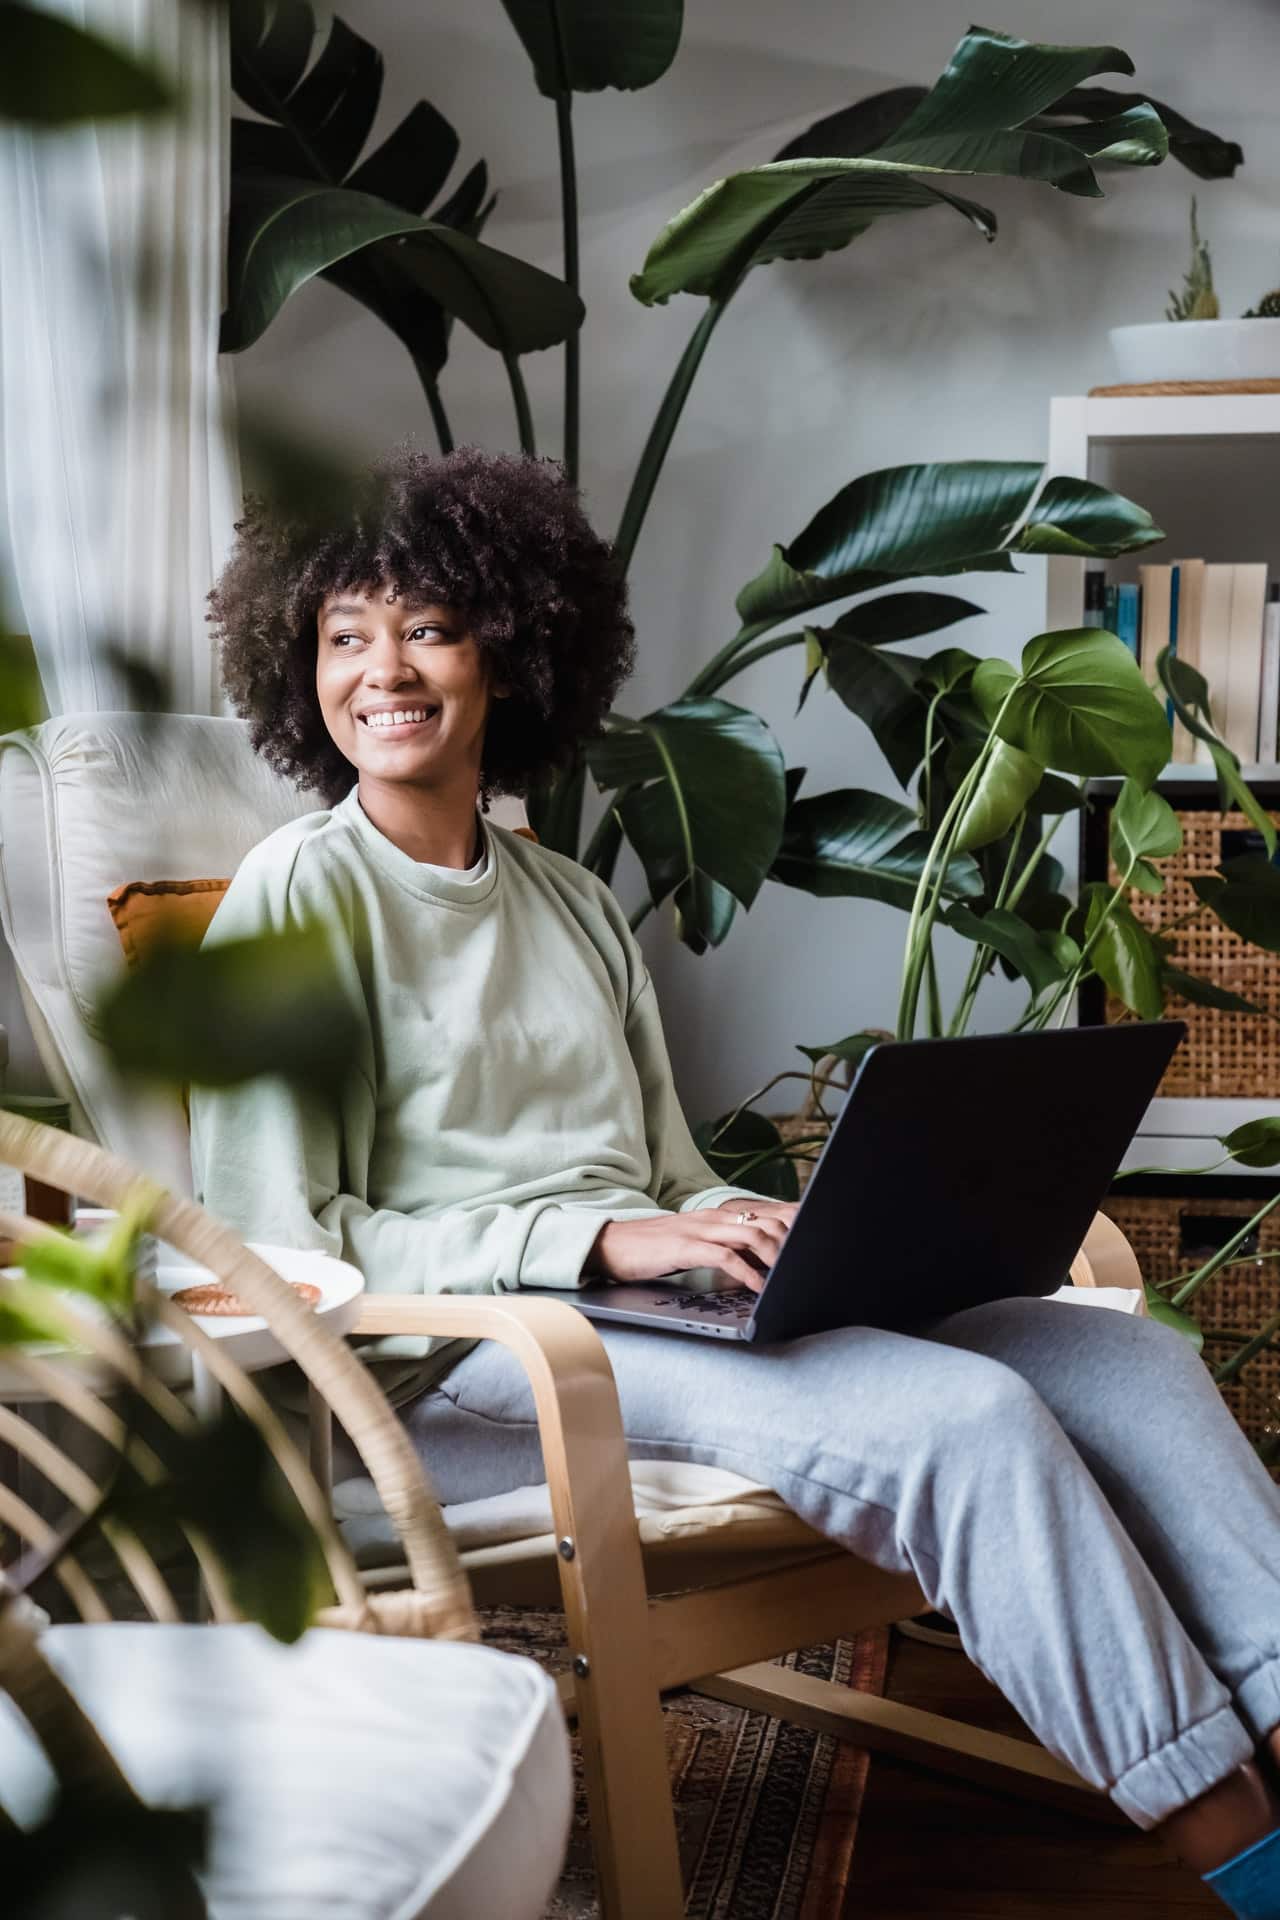 A young Black woman in casual clothing sits in an armchair with a laptop on her lap. She has a relaxed expression on her face. The room is full of houseplants and natural lighting.